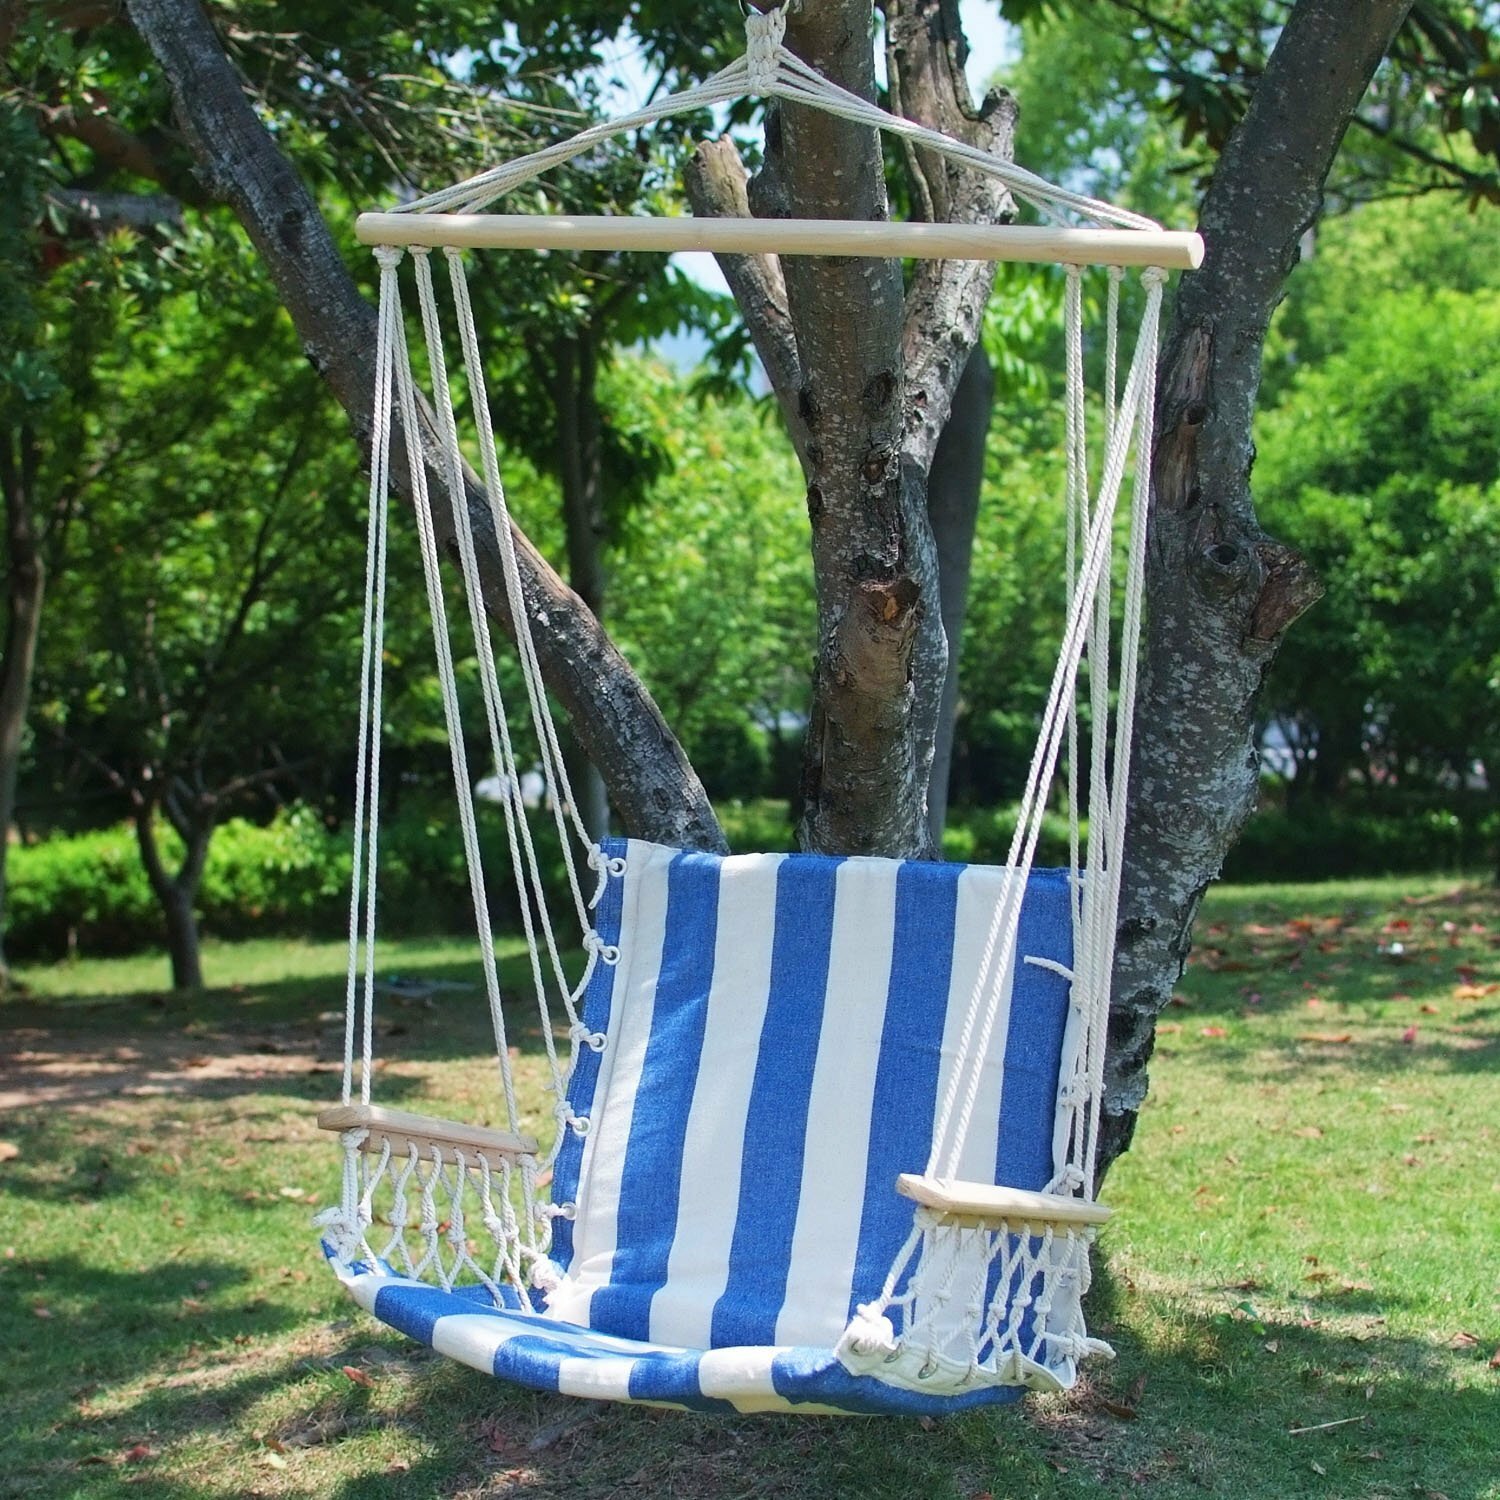 Adecotrading Naval Cotton Fabric Canvas Tree Hanging Suspended Outdoor Indoor Hammock Chair